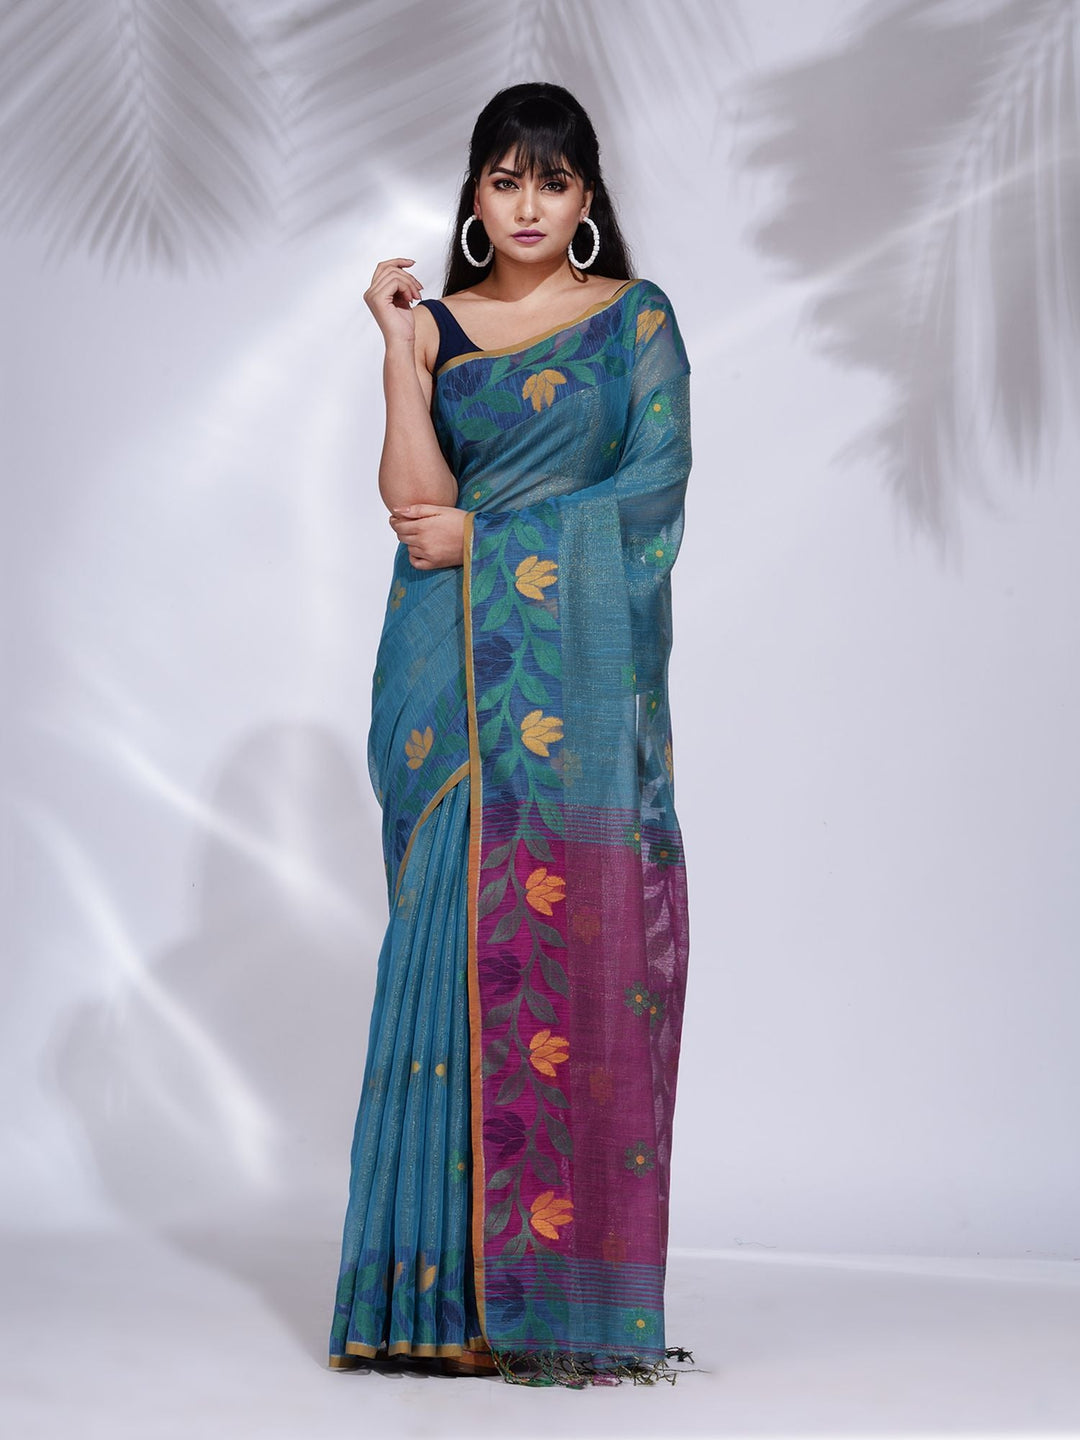 CHARUKRITI Teal Tissue Handwoven Soft Saree with Nakshi Border with Unstitched Blouse